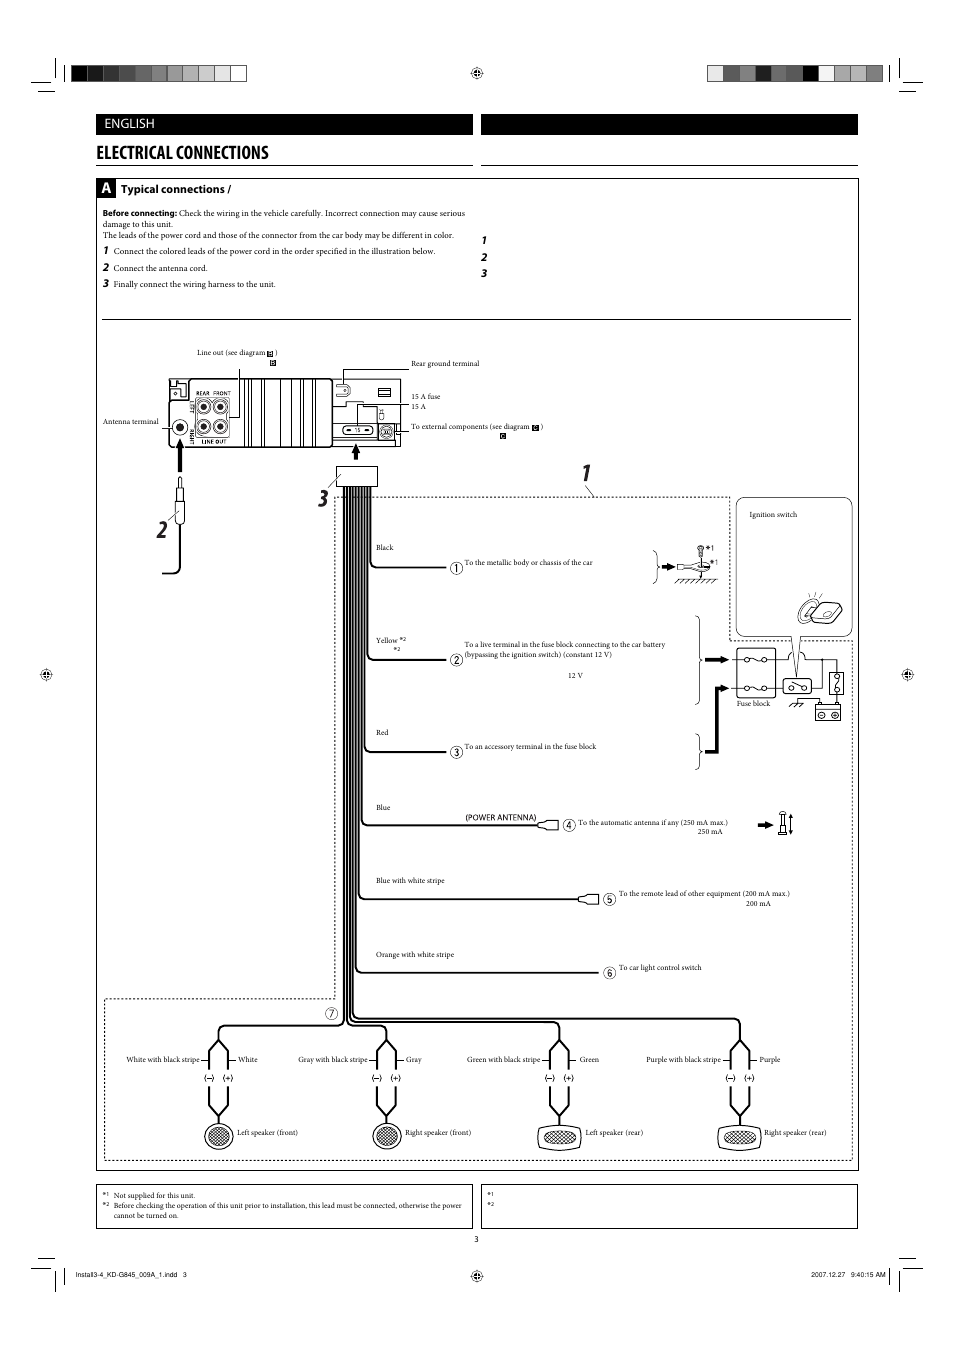 Electrical Connections English Jvc Kd Apd89 User Manual Page 325 472